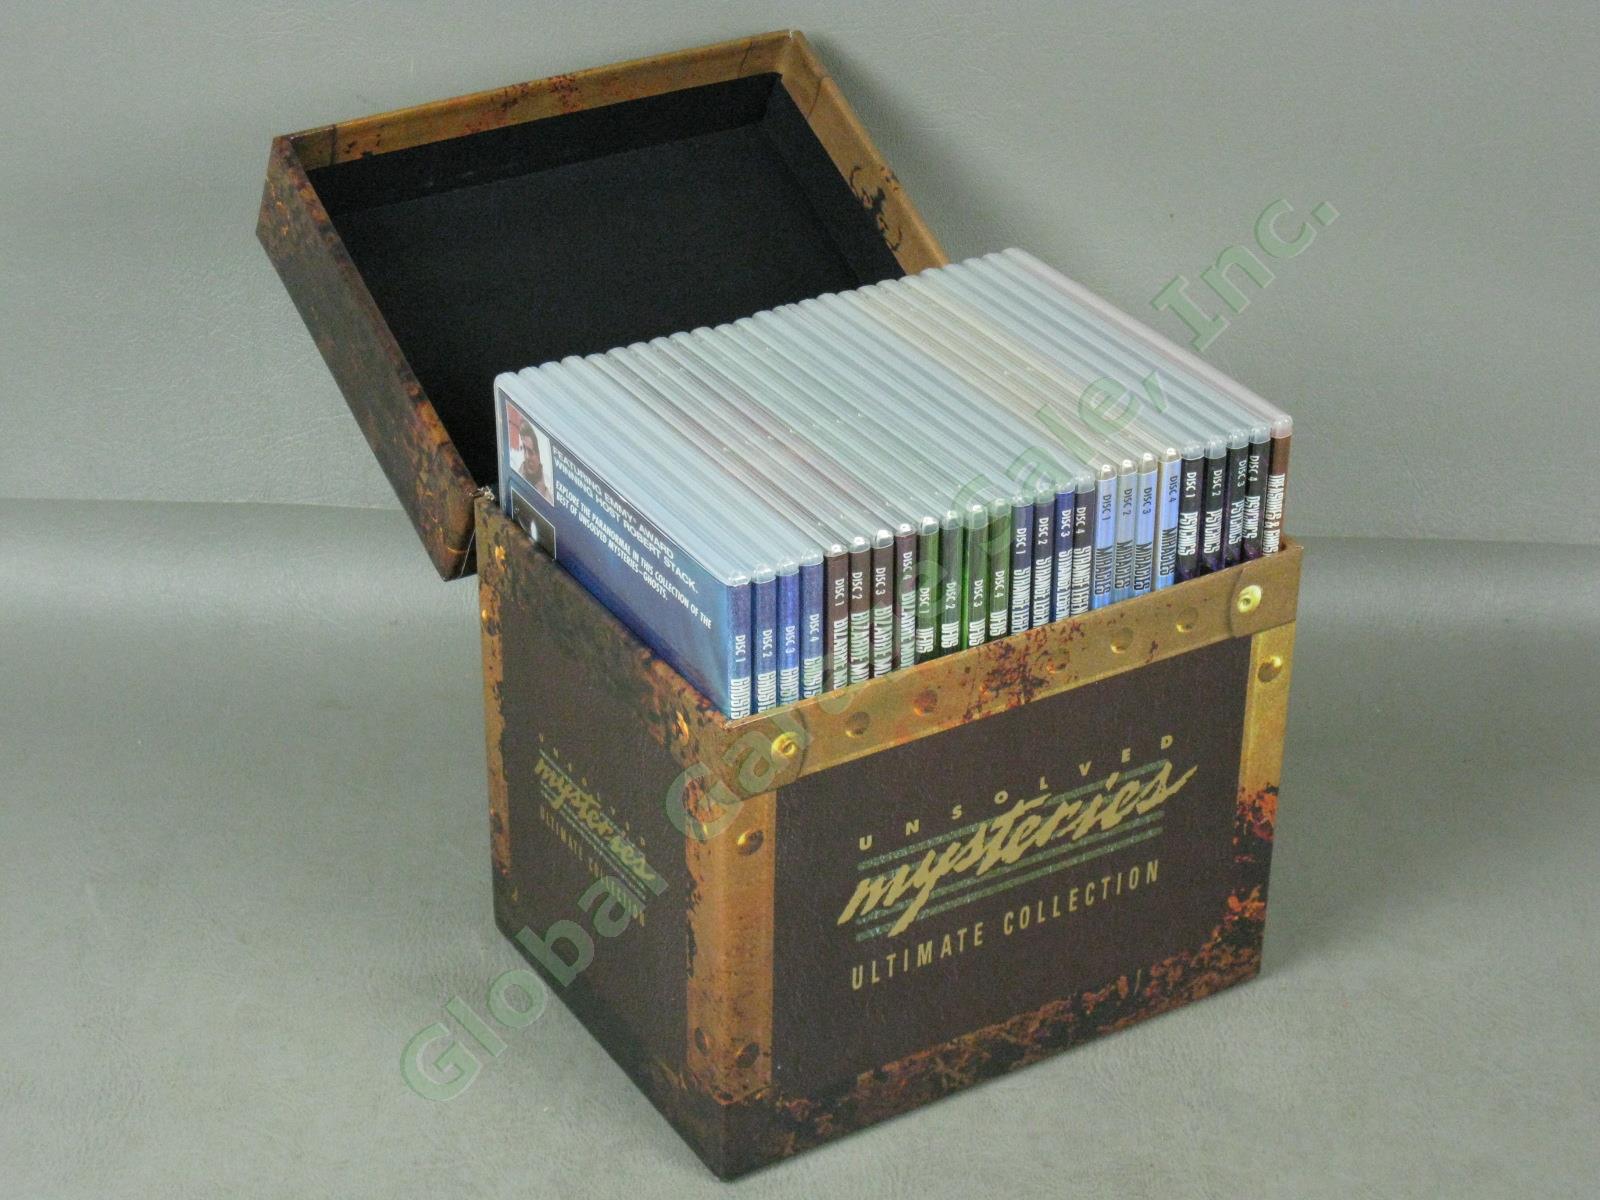 Unsolved Mysteries The Ultimate Collection 25-DVD Box Set Ghosts UFOs Miracles + 1